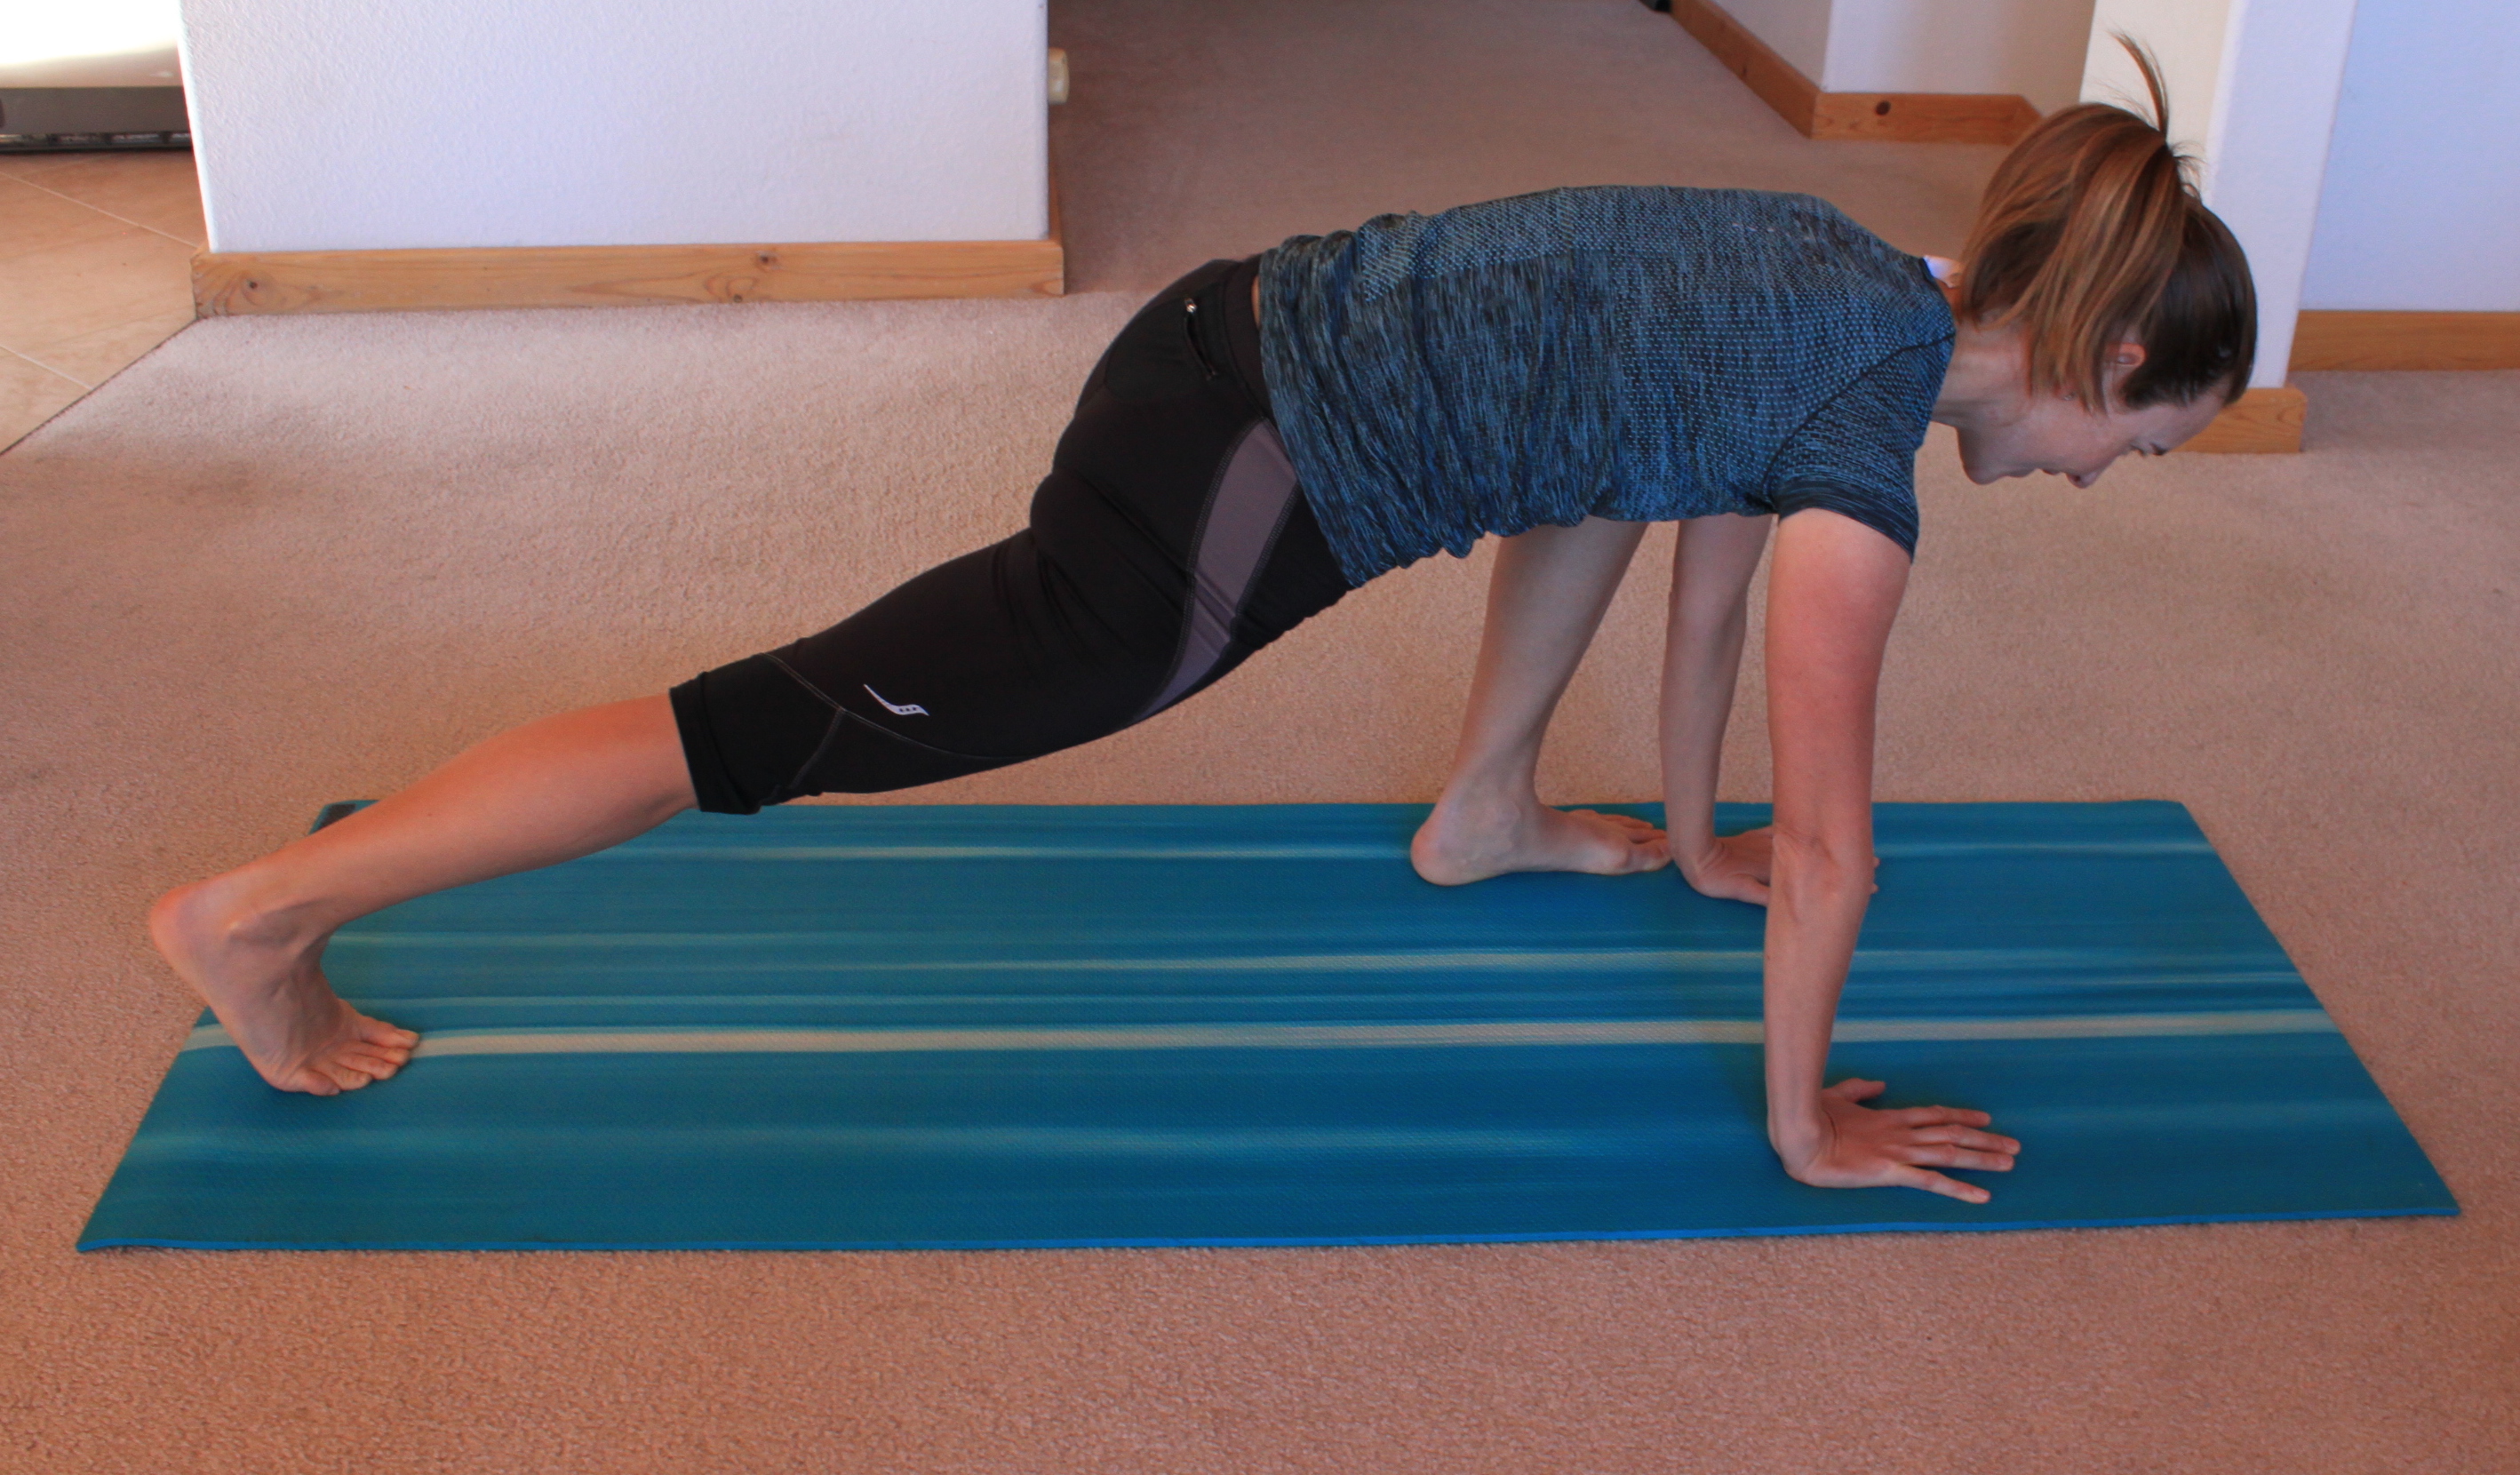 How To Do a Mountain Climbers Exercise? – Bellabeat